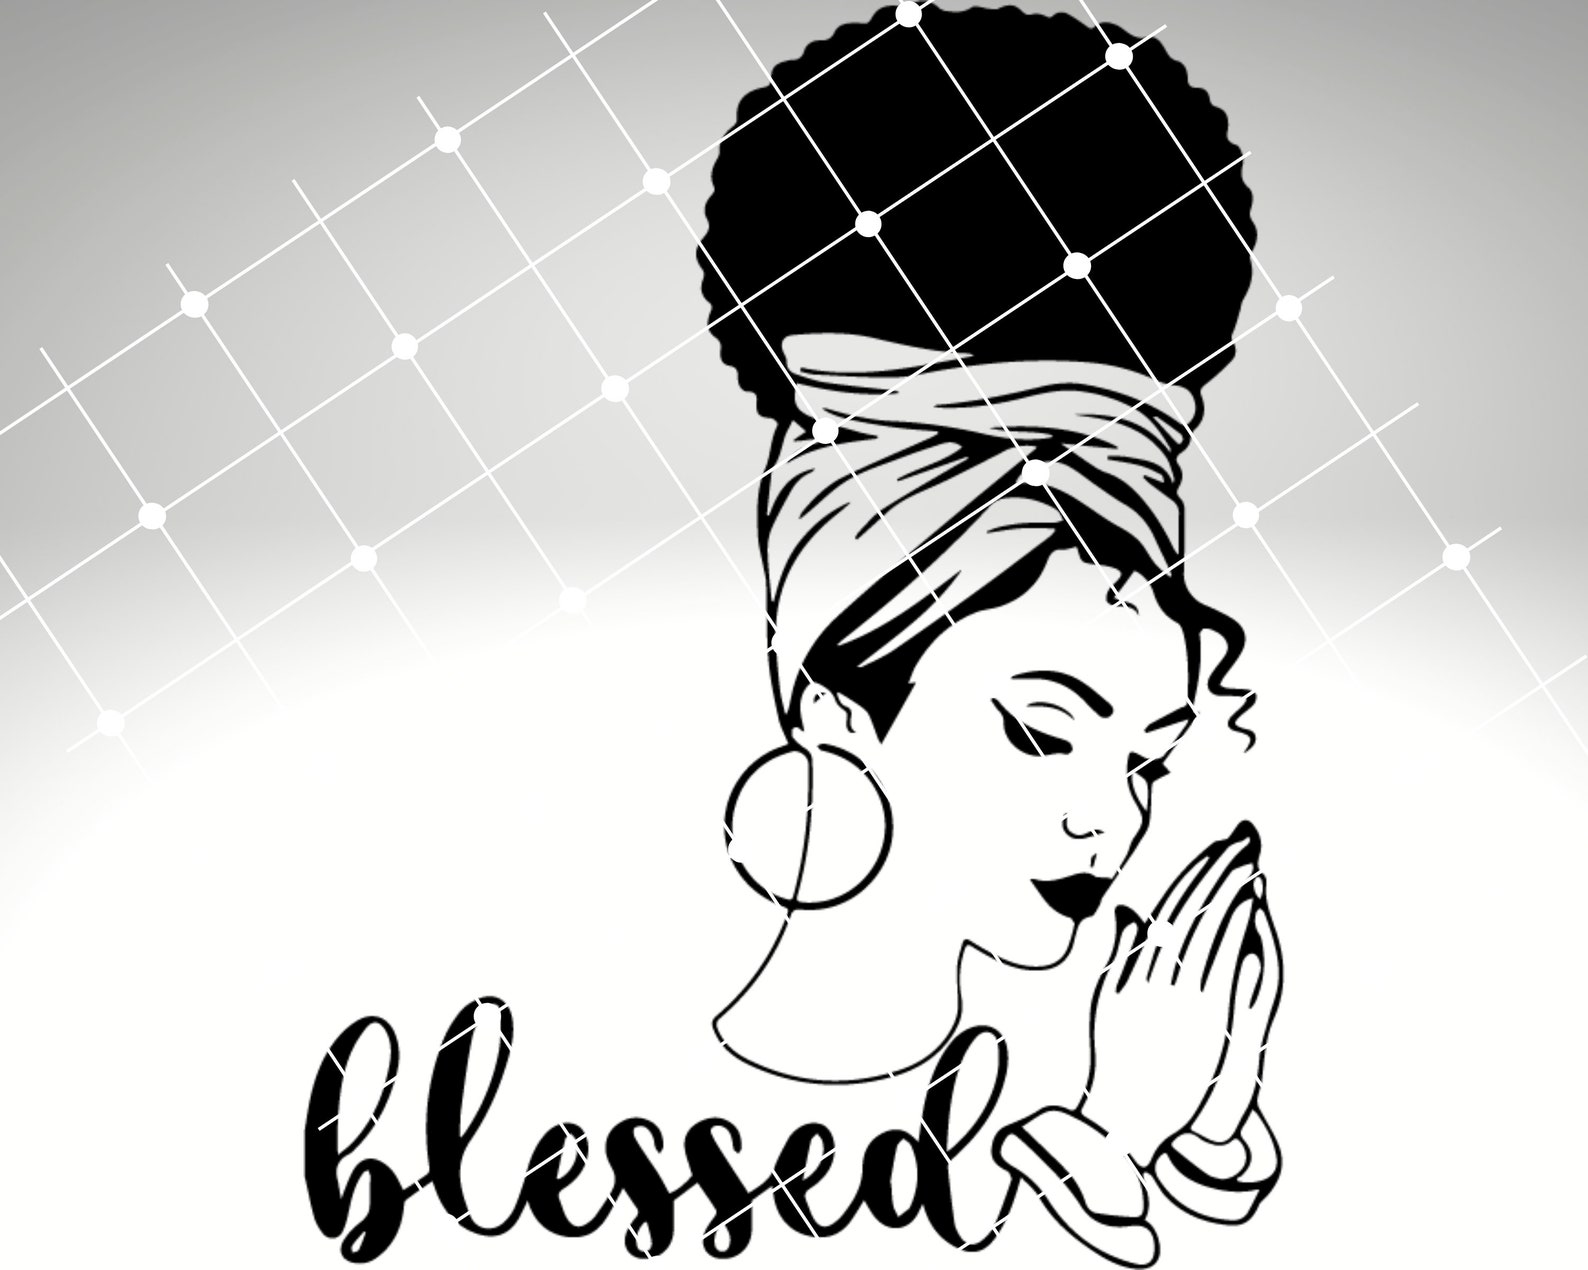 Blessed, Black Woman SVG, Afro Girl SVG, Afro Hair, Boss Lady Girl ...